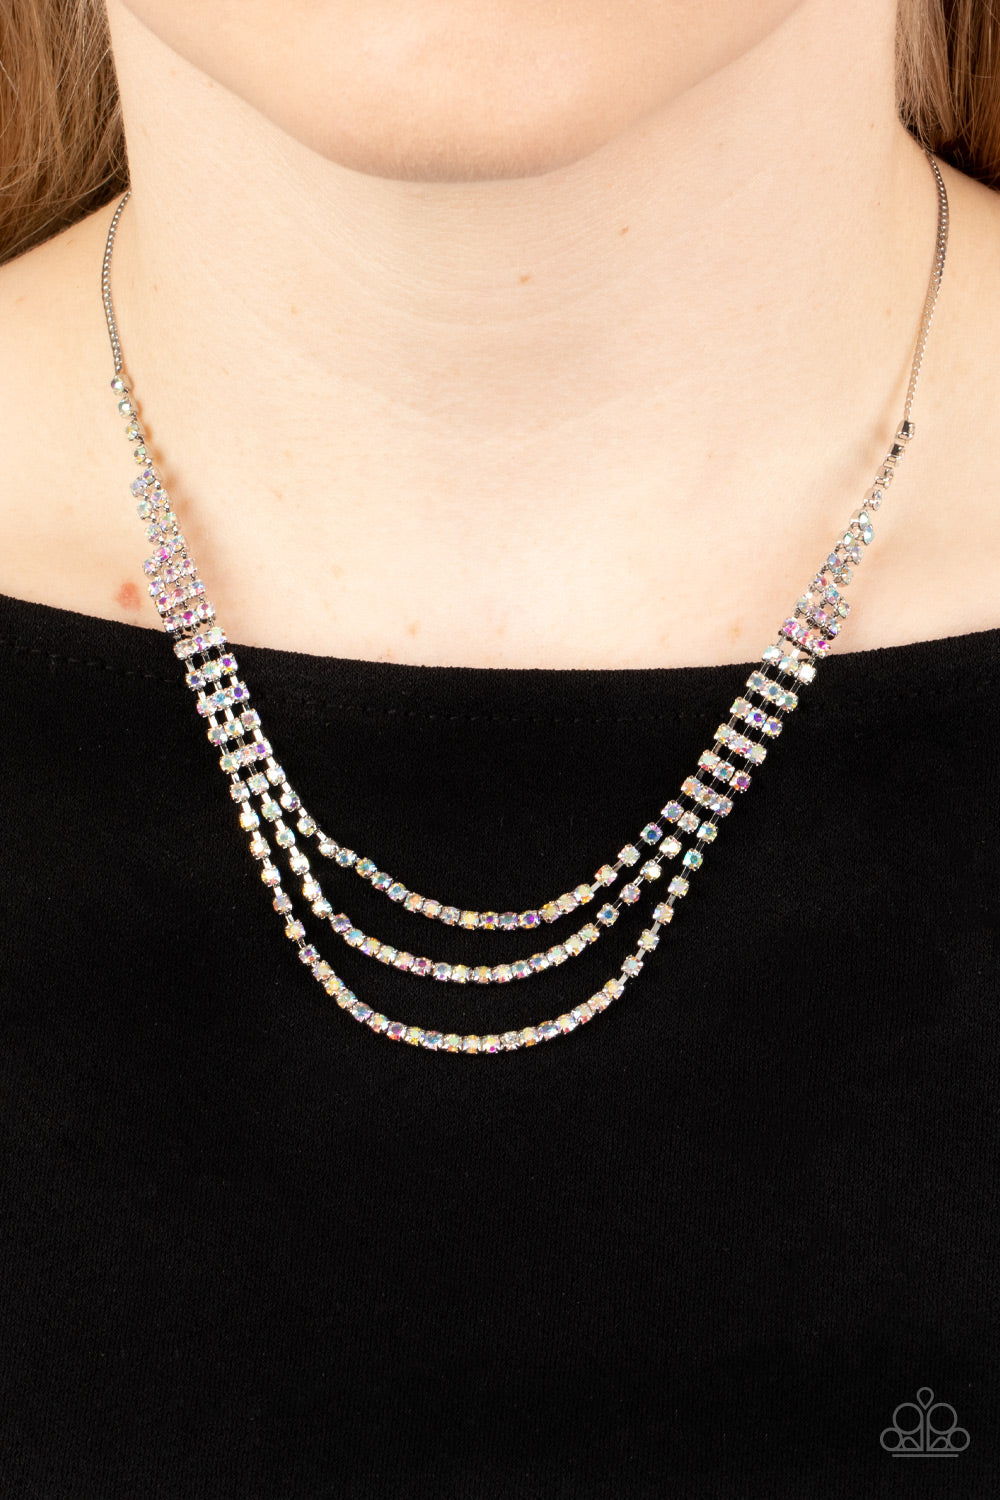 Paparazzi Accessories Surreal Sparkle - Multi Featuring square fittings staggered rows of iridescent rhinestones cascade from a dainty silver snake chain below the collar. The interconnected rows delicately give way to freefalling layers, adding glitzy mo